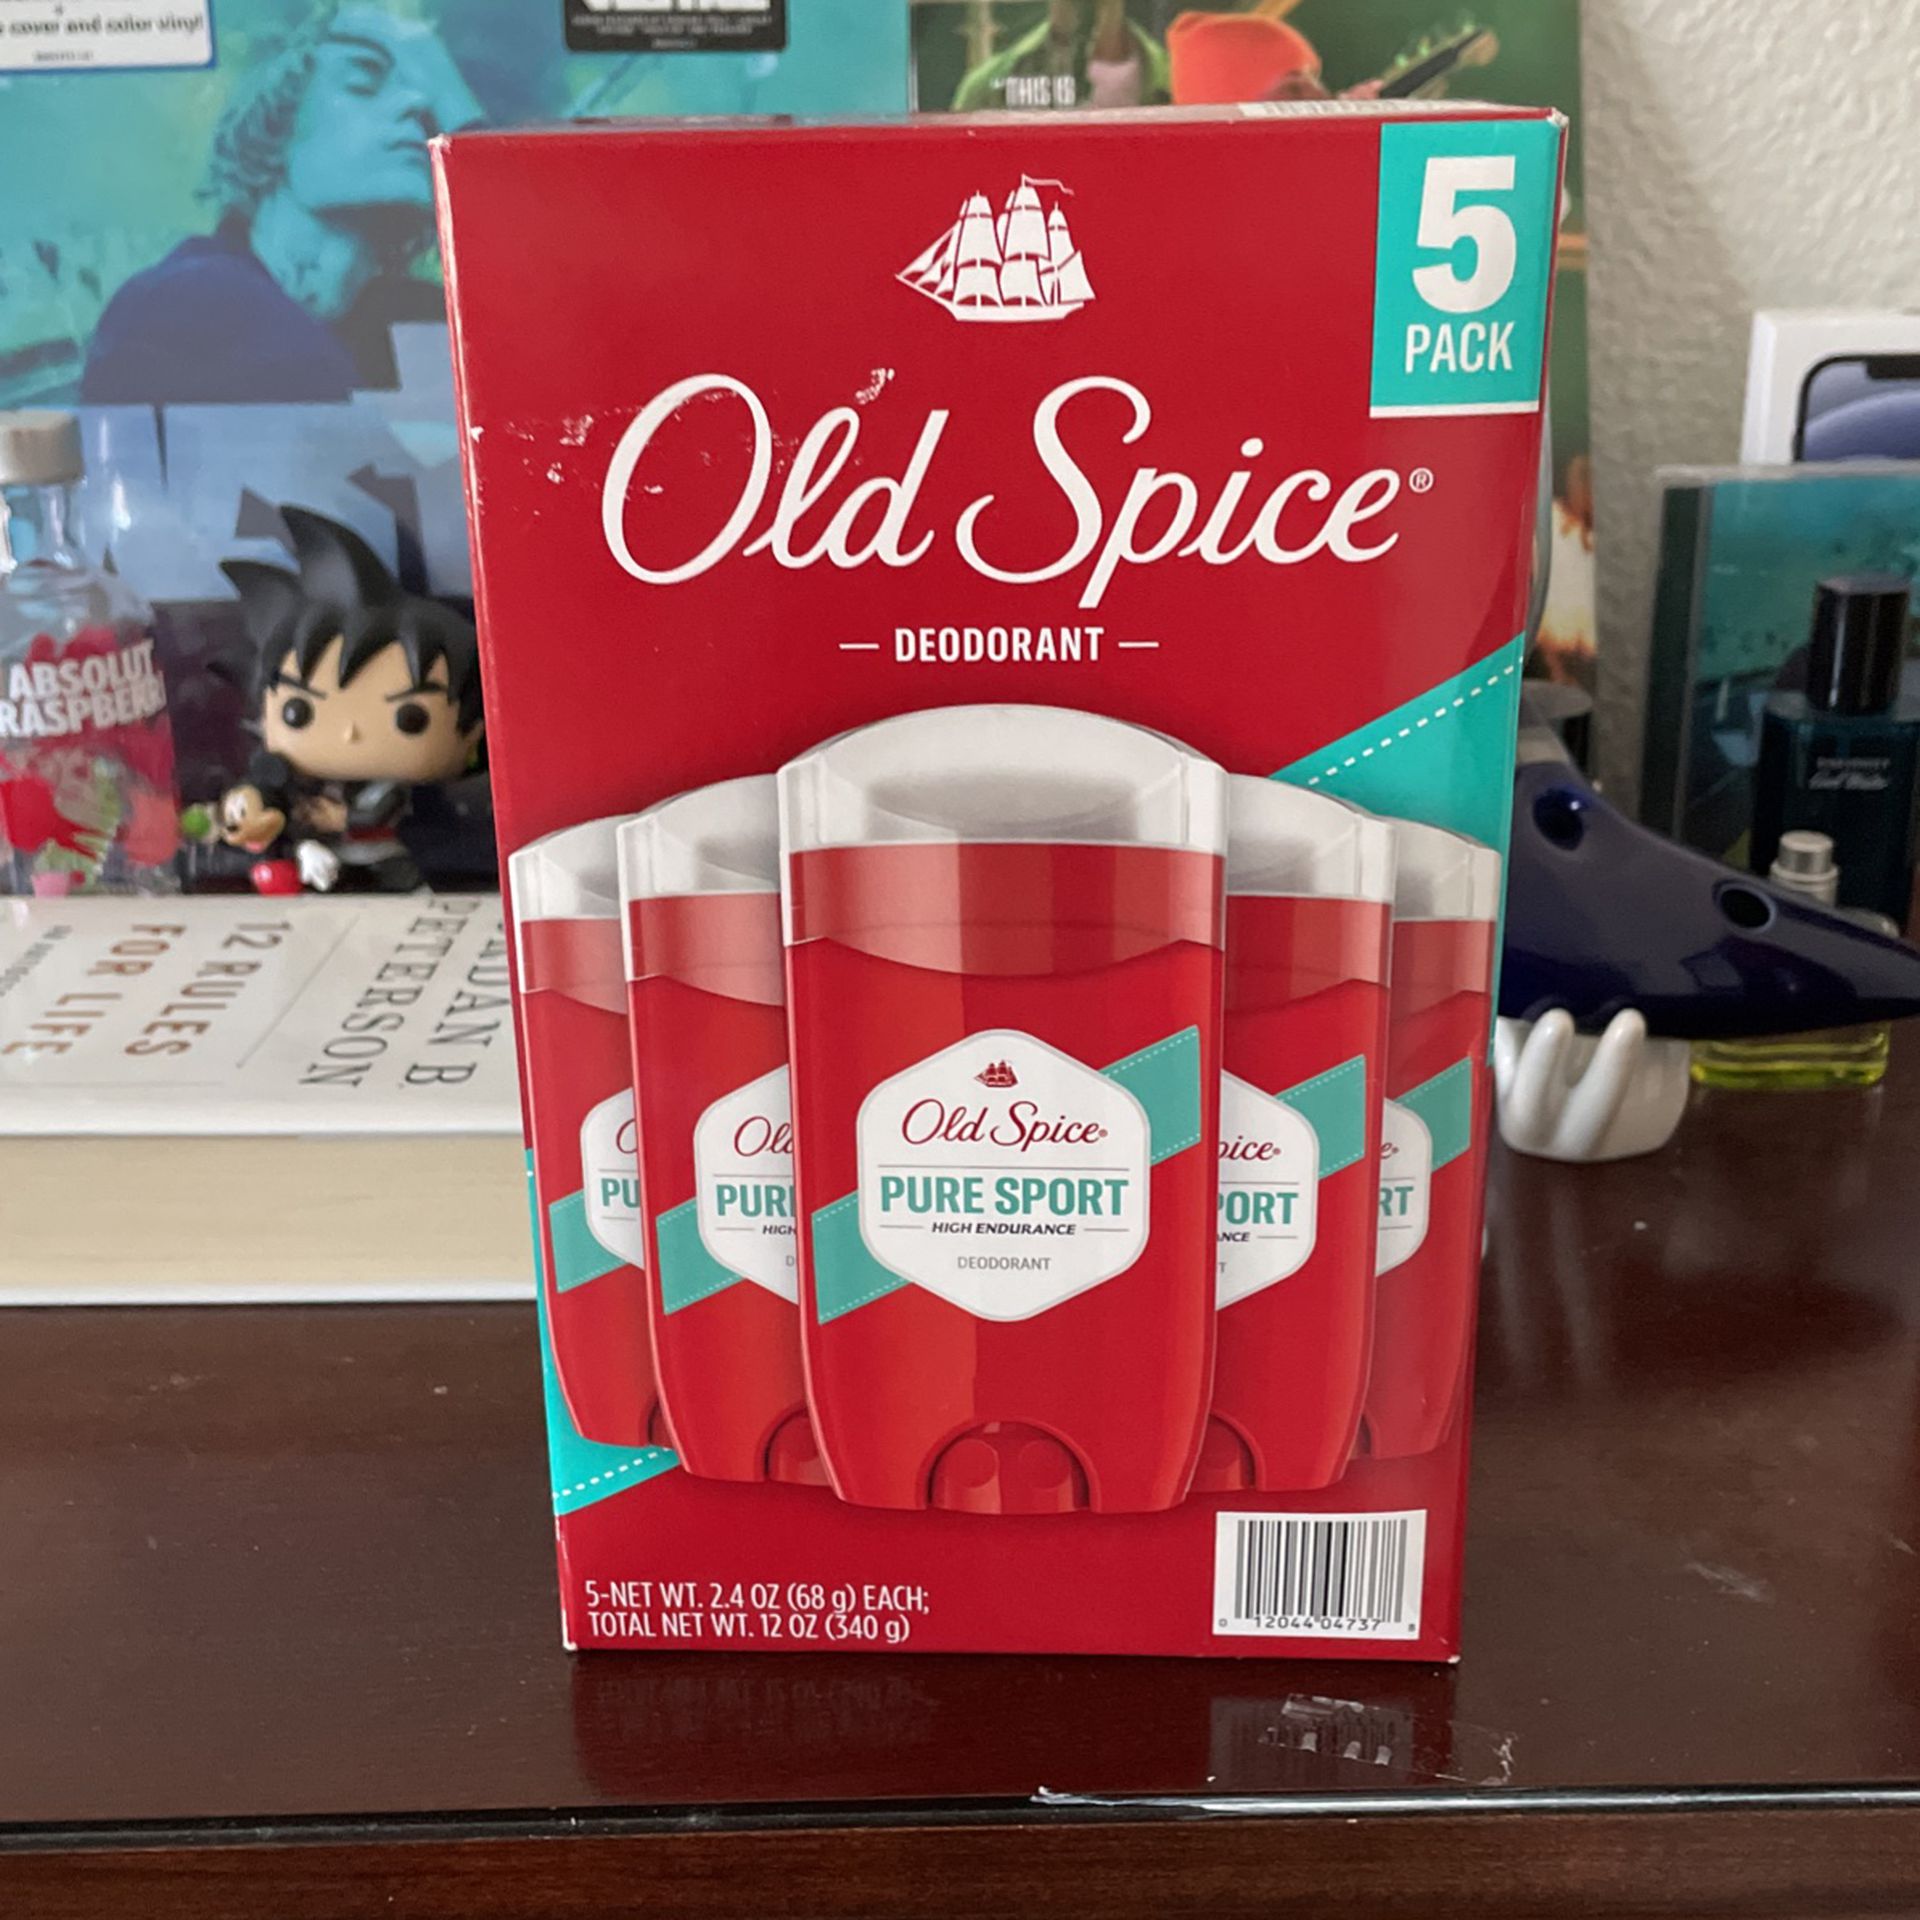 Old spice pure sport (5pack)